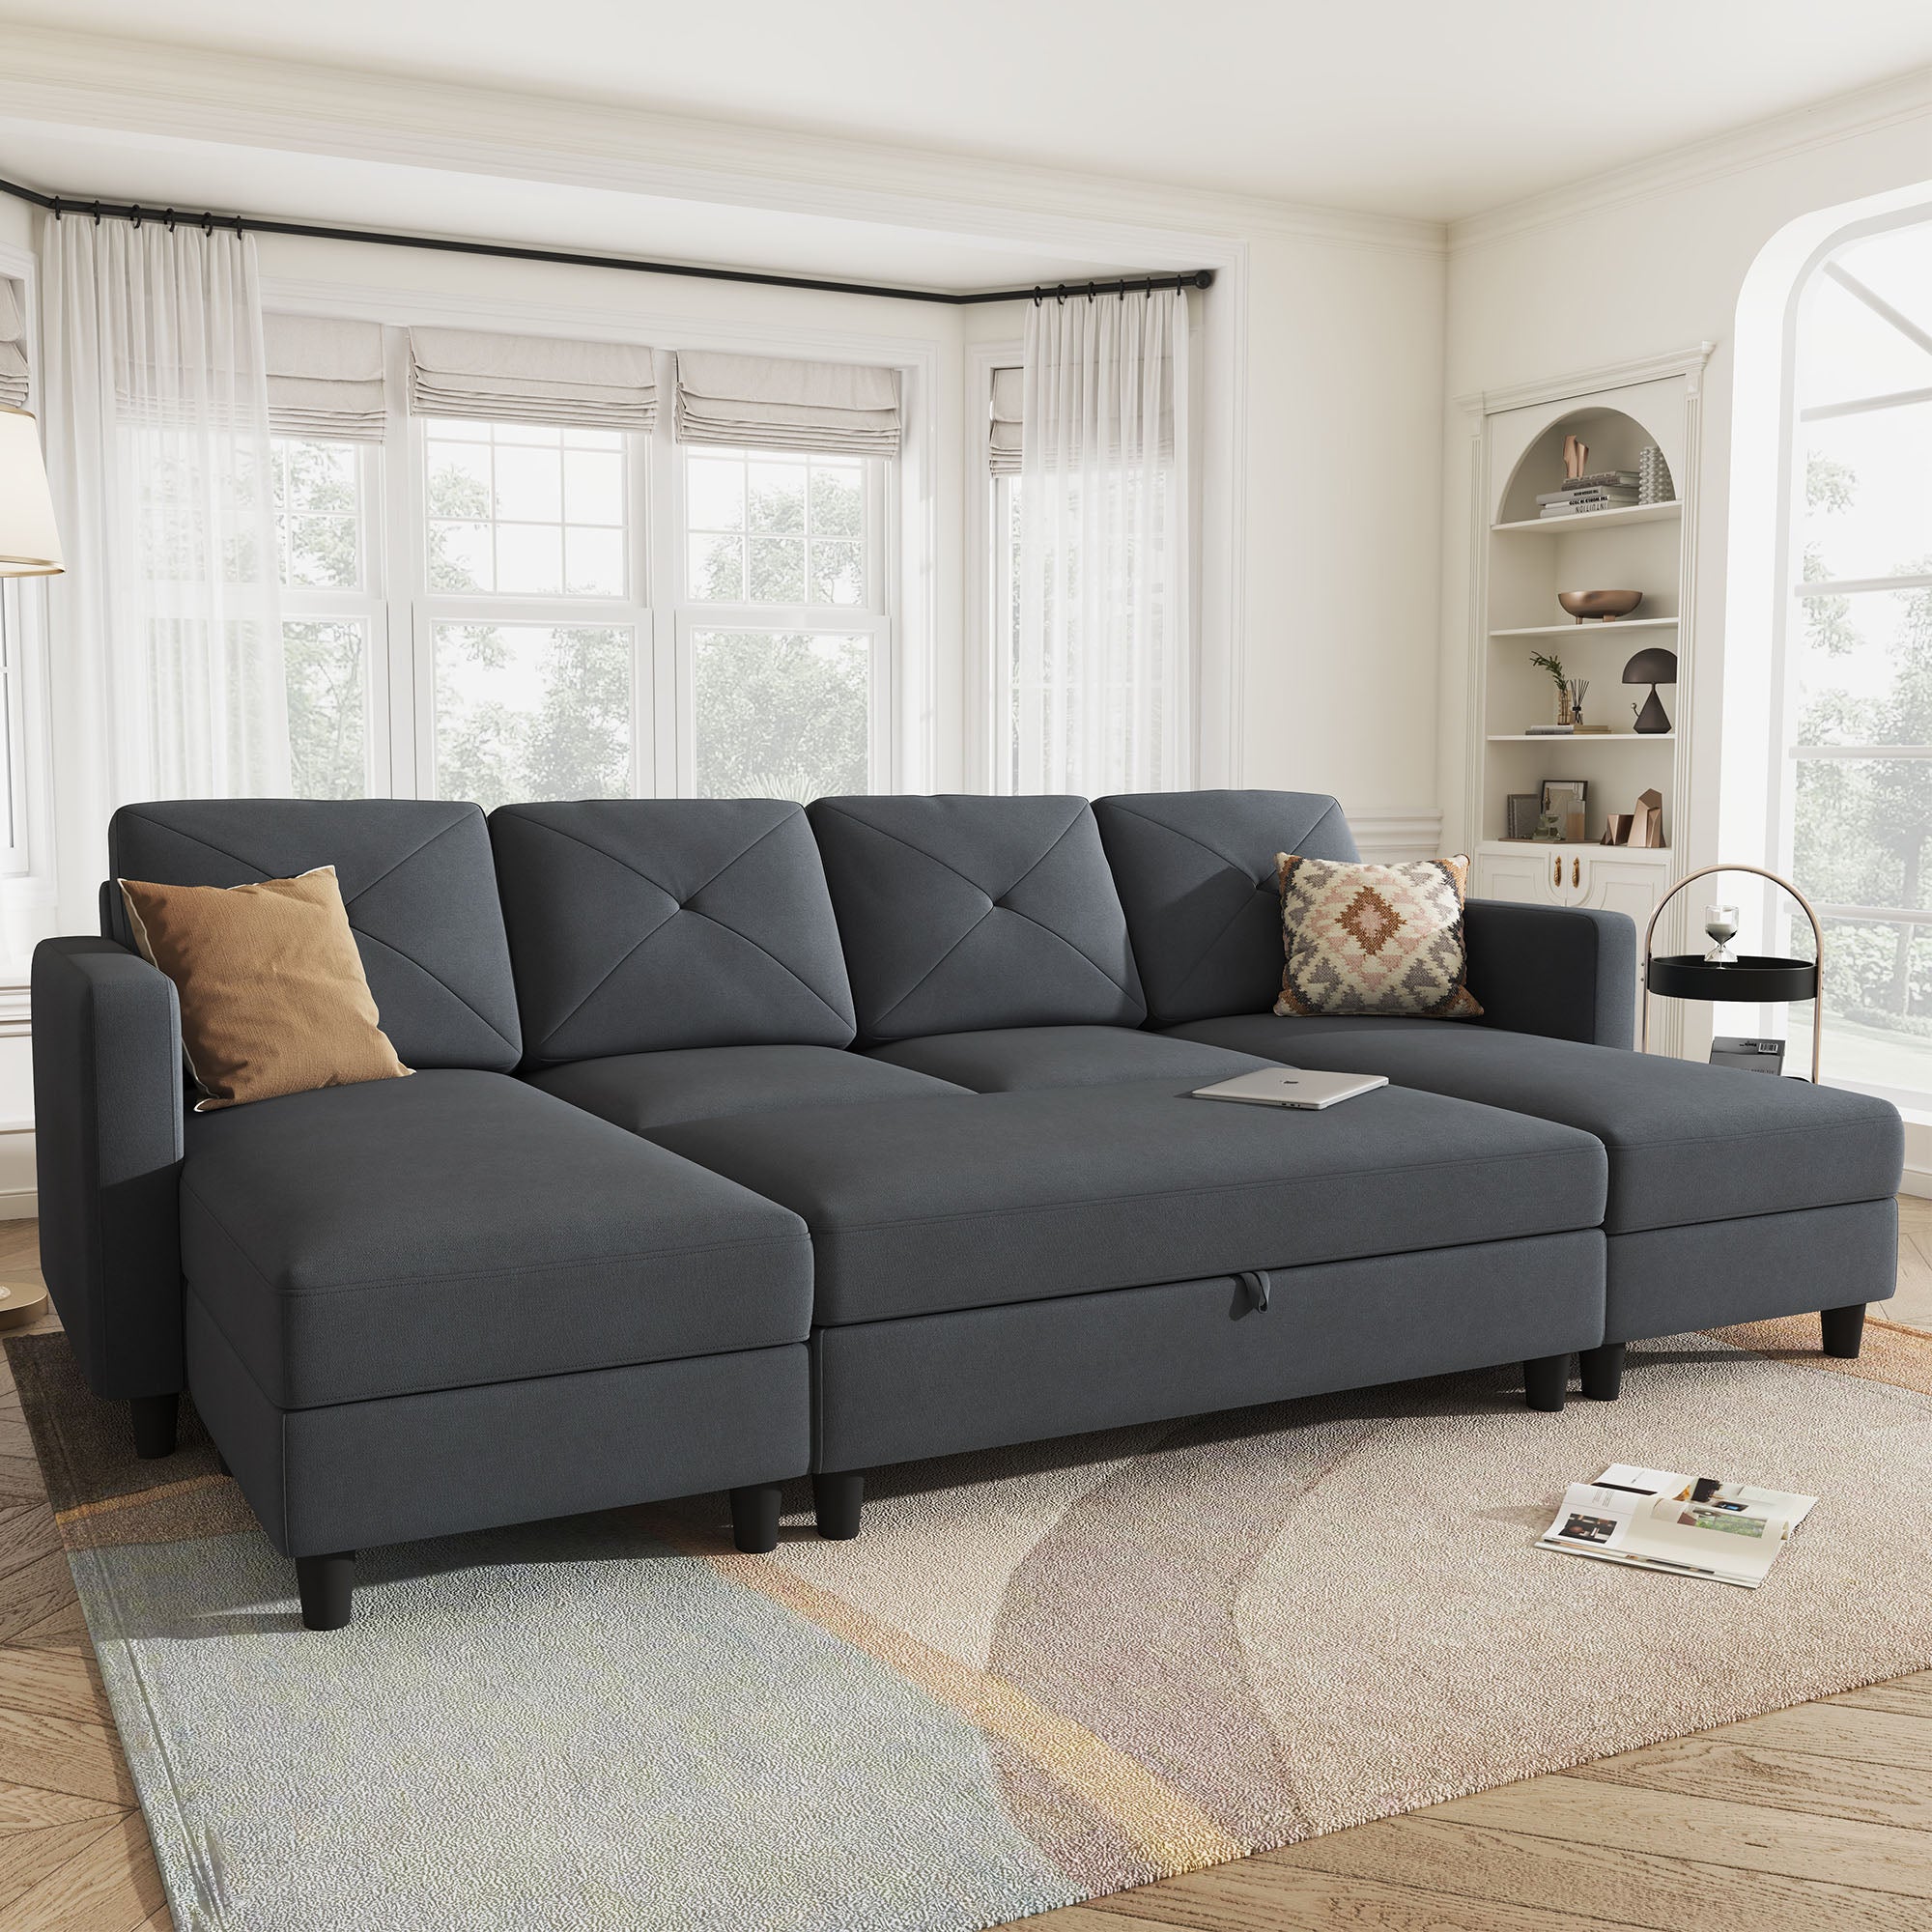 HONBAY 6-Piece Polyester Convertible Sleeper Sectional With Storage Ottoman